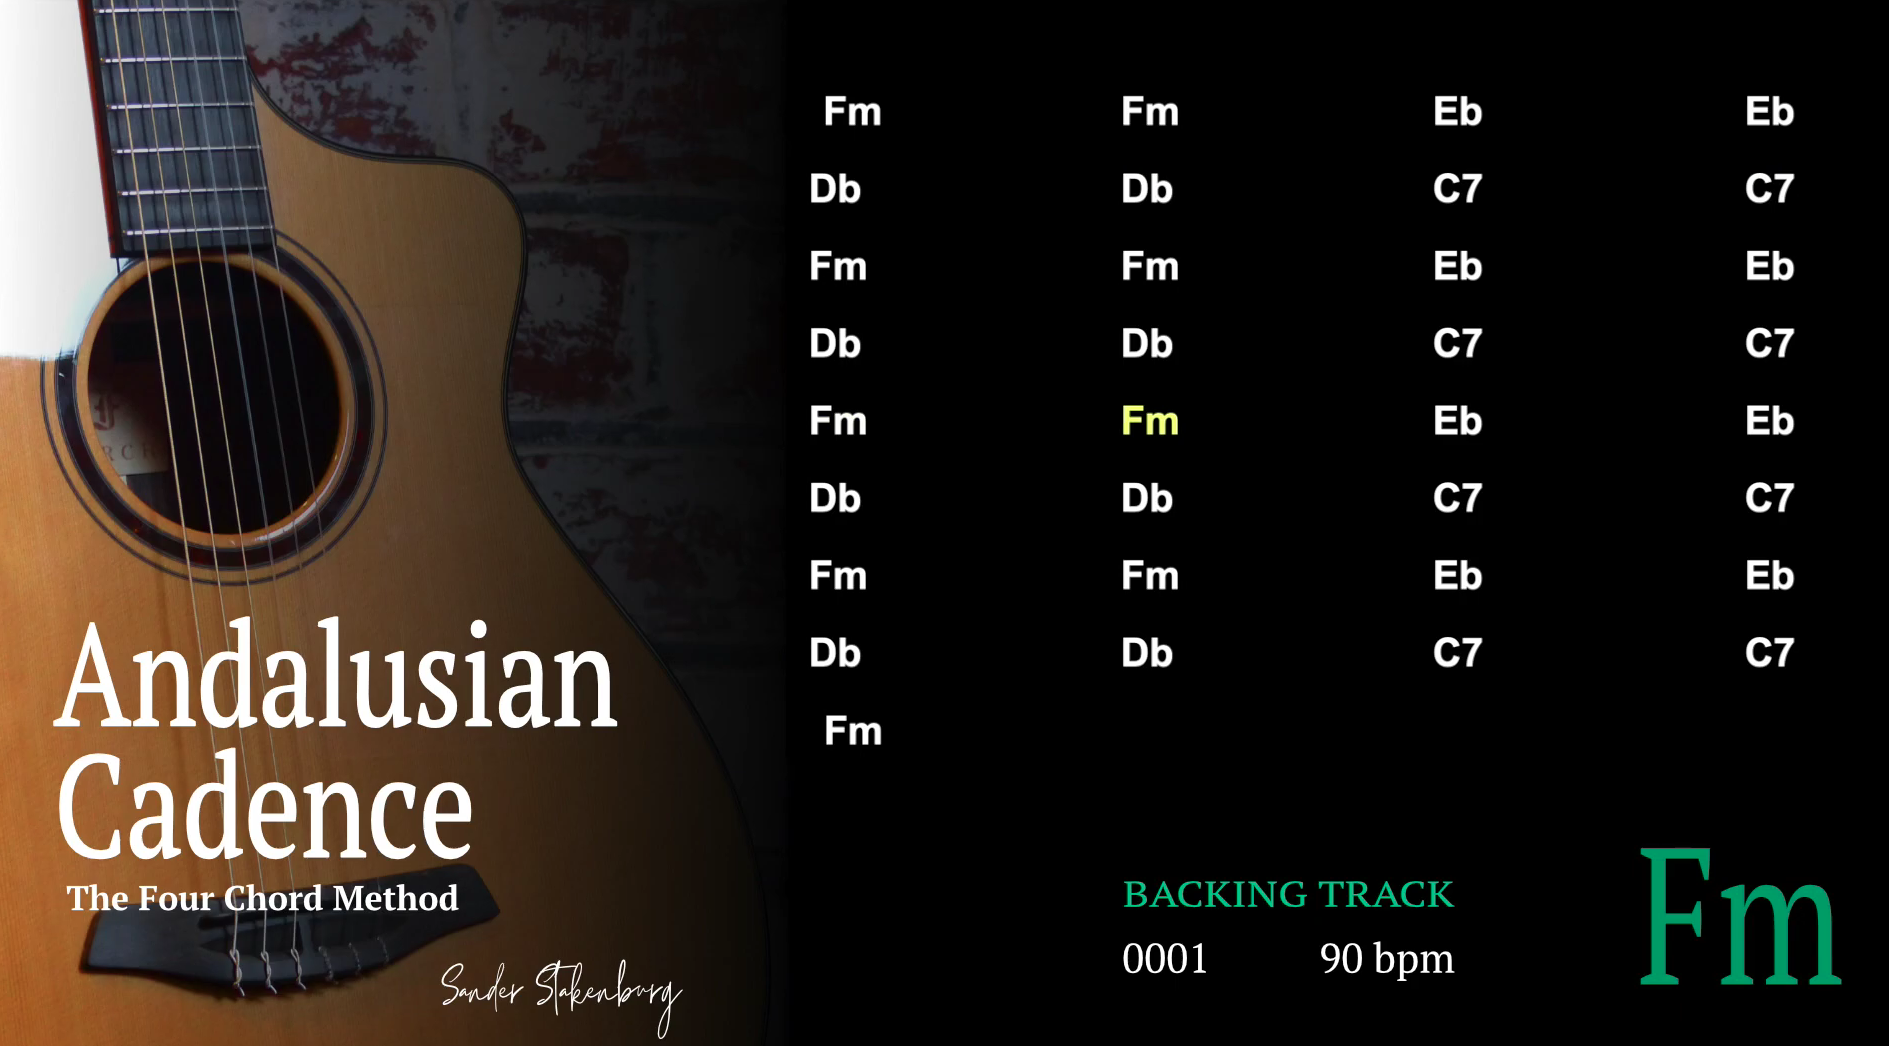 Andalusian Cadence 0001 Backing Tracks in all Keys